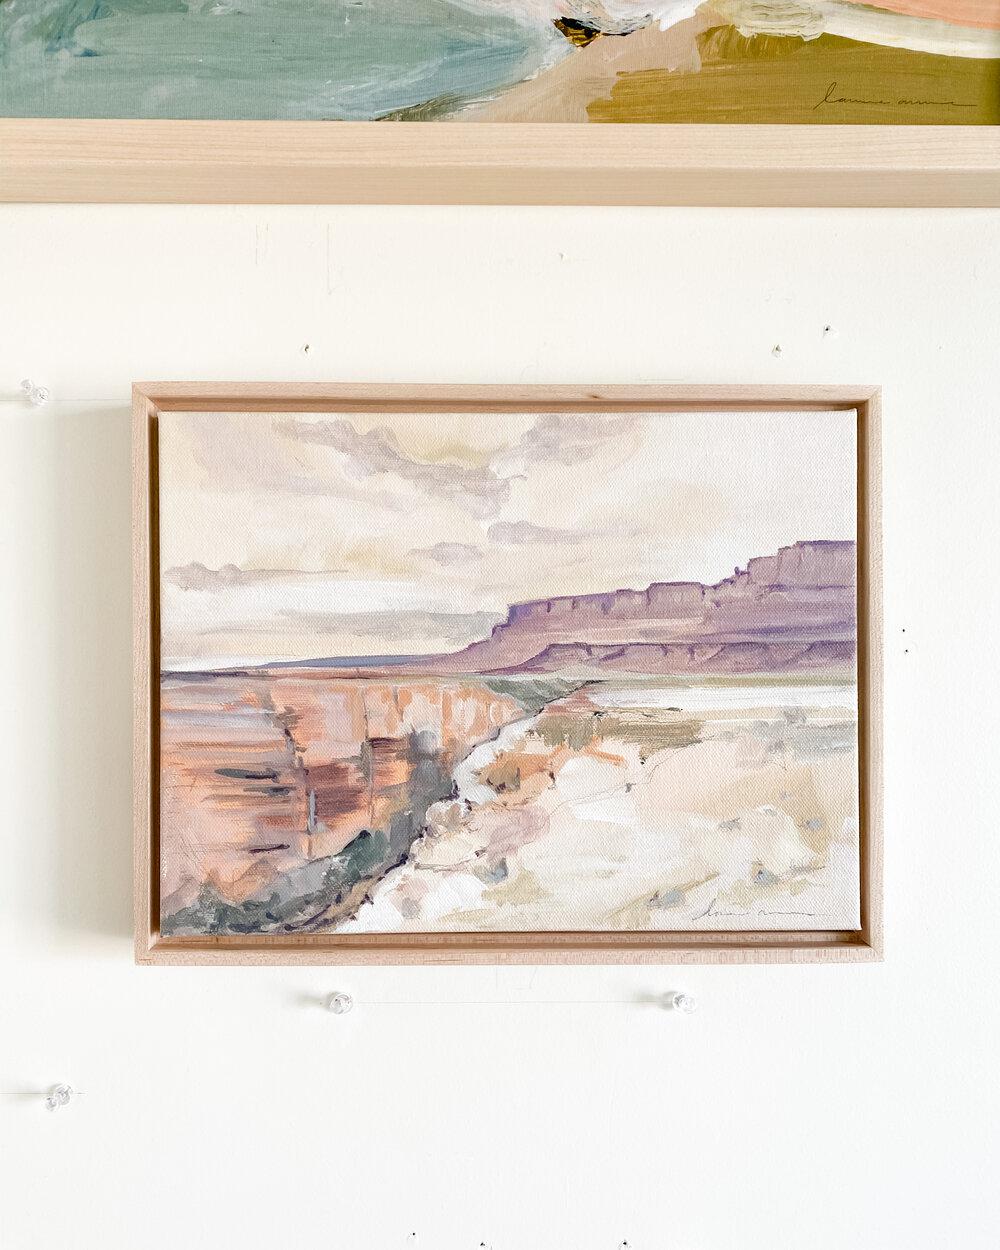 Marble Canyon Framed Original Painting 9x12